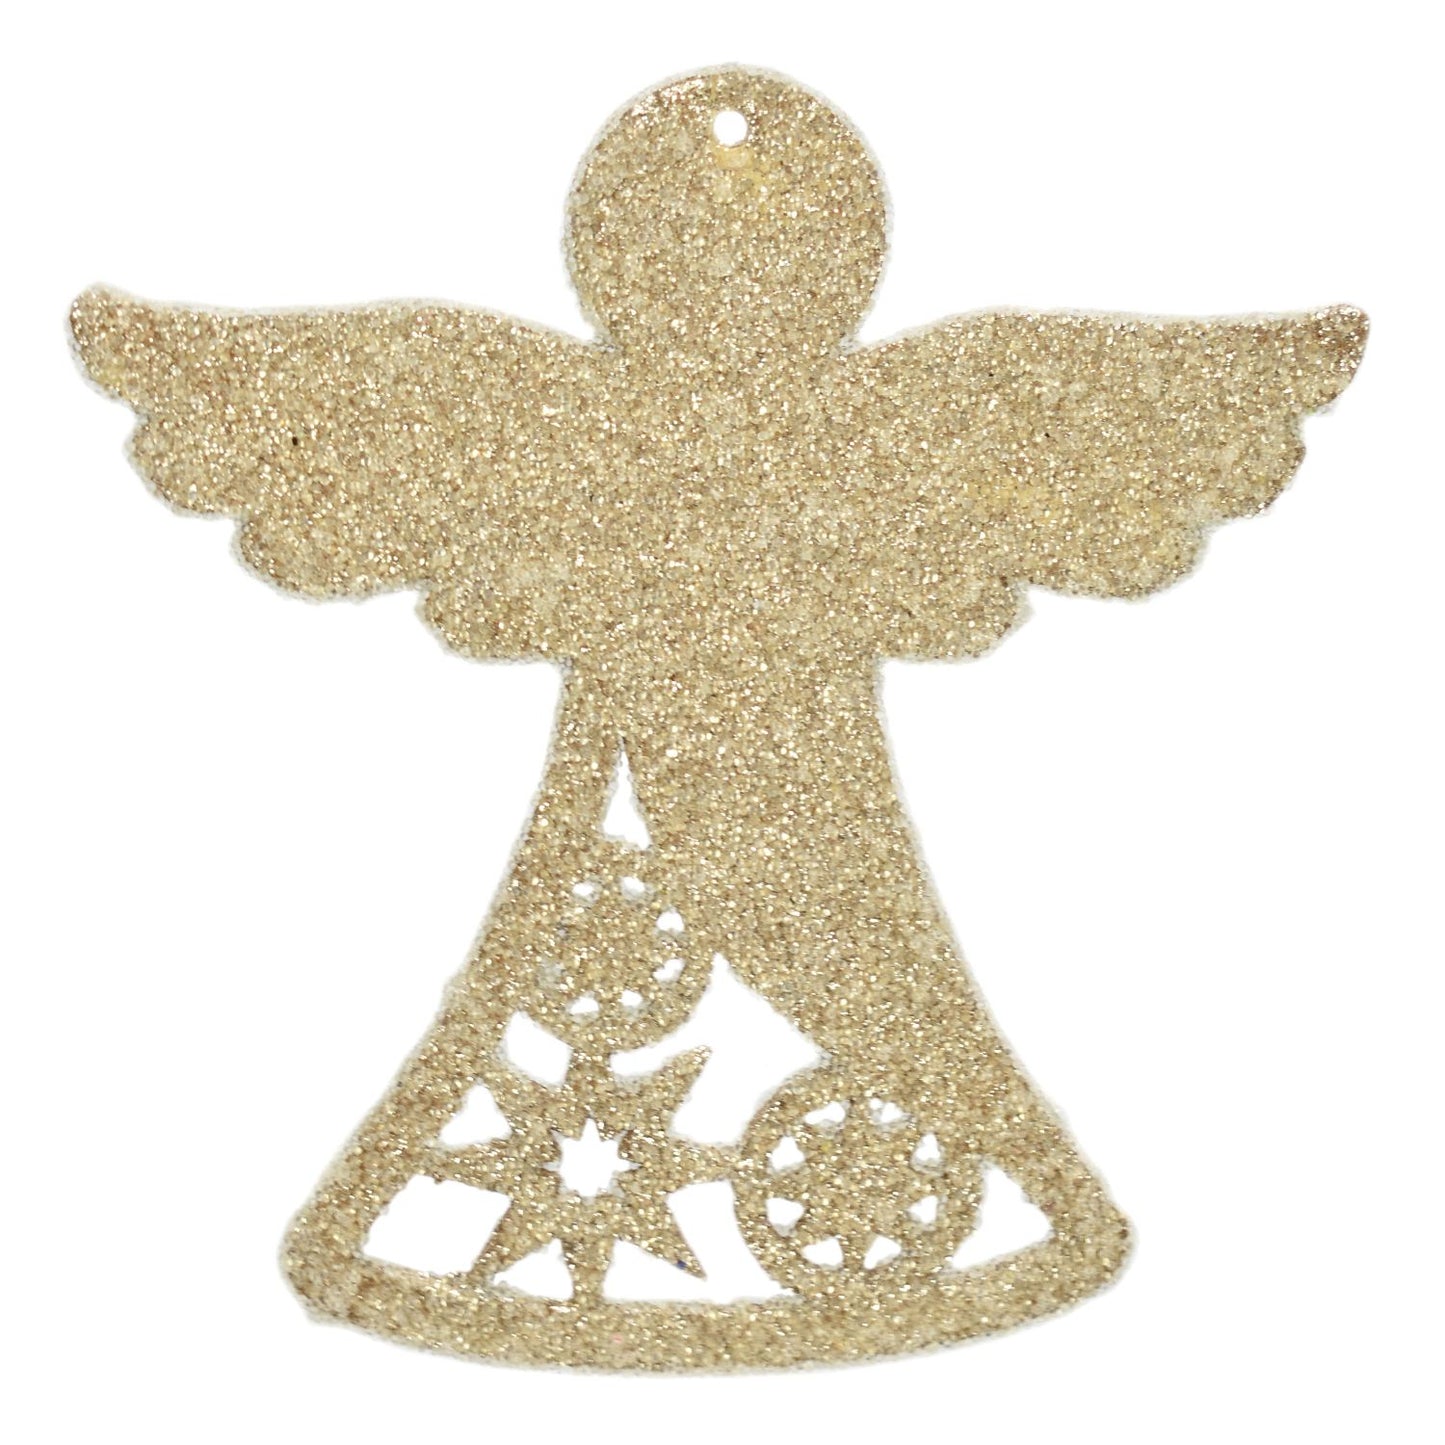 6" x 6" Beaded Cut-Out Angel Ornament in Platinum | TA